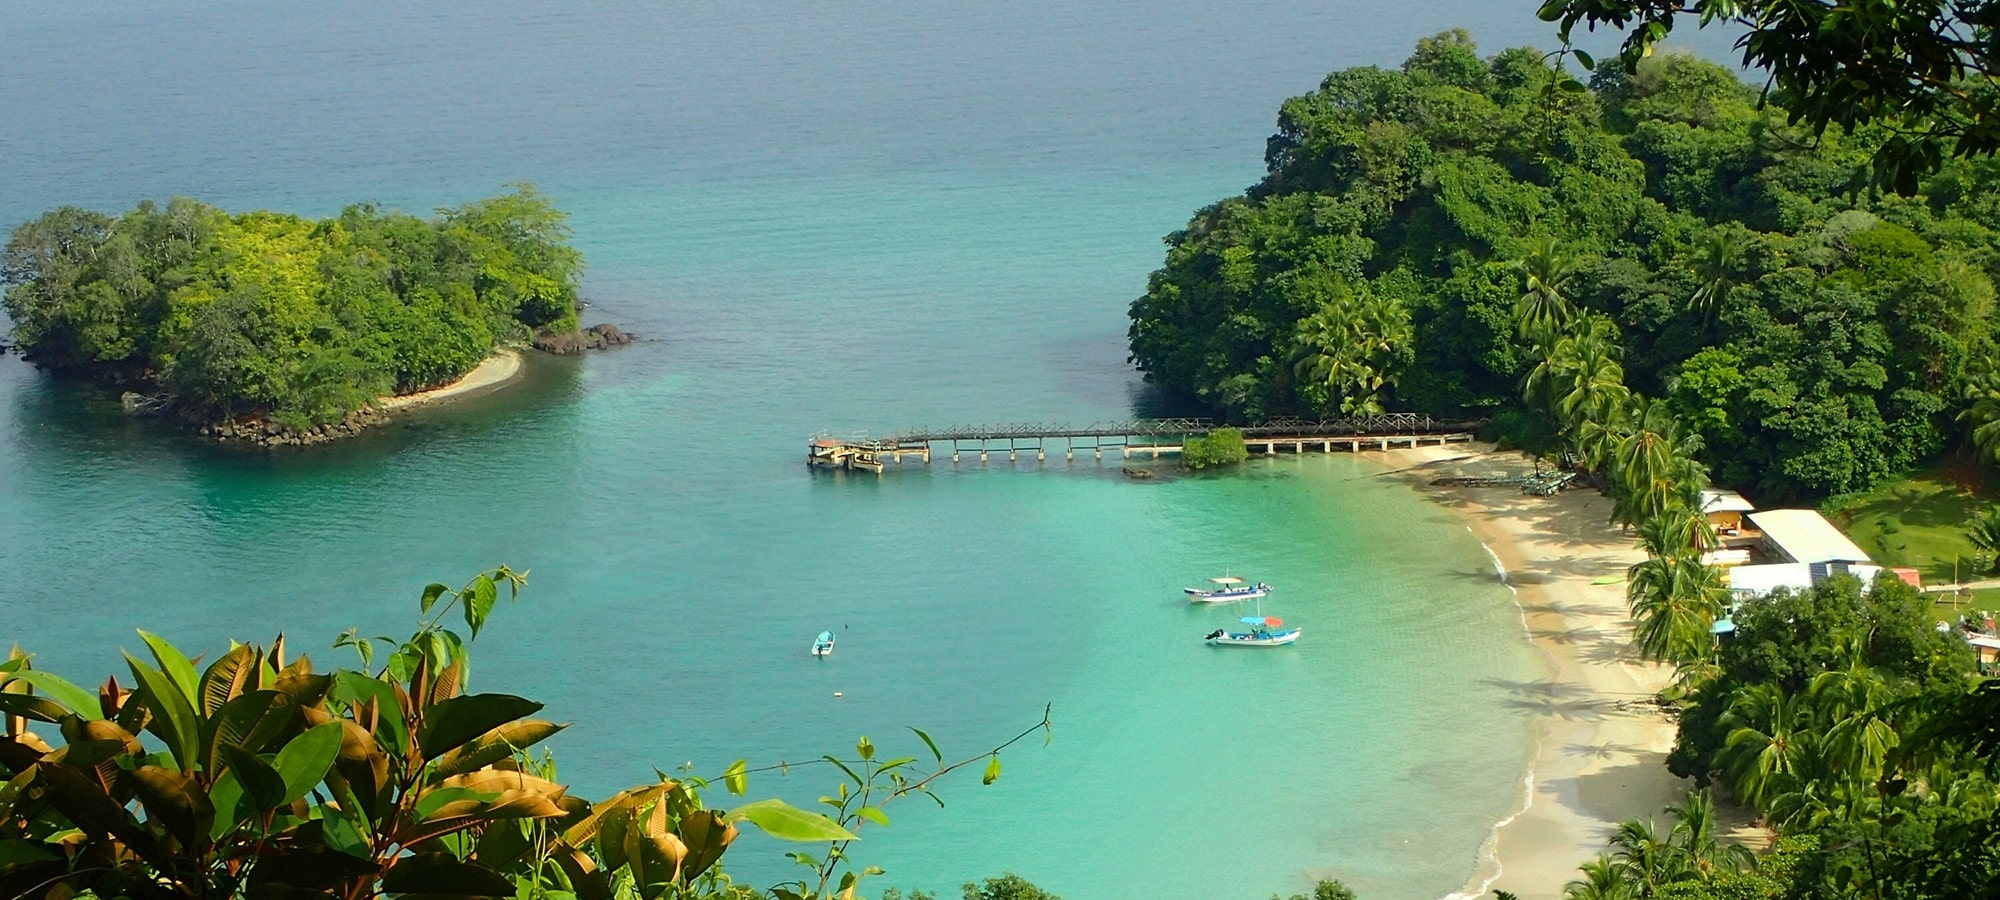 Panama and Costa Rica offer some of the best snorkeling spots in Central America.